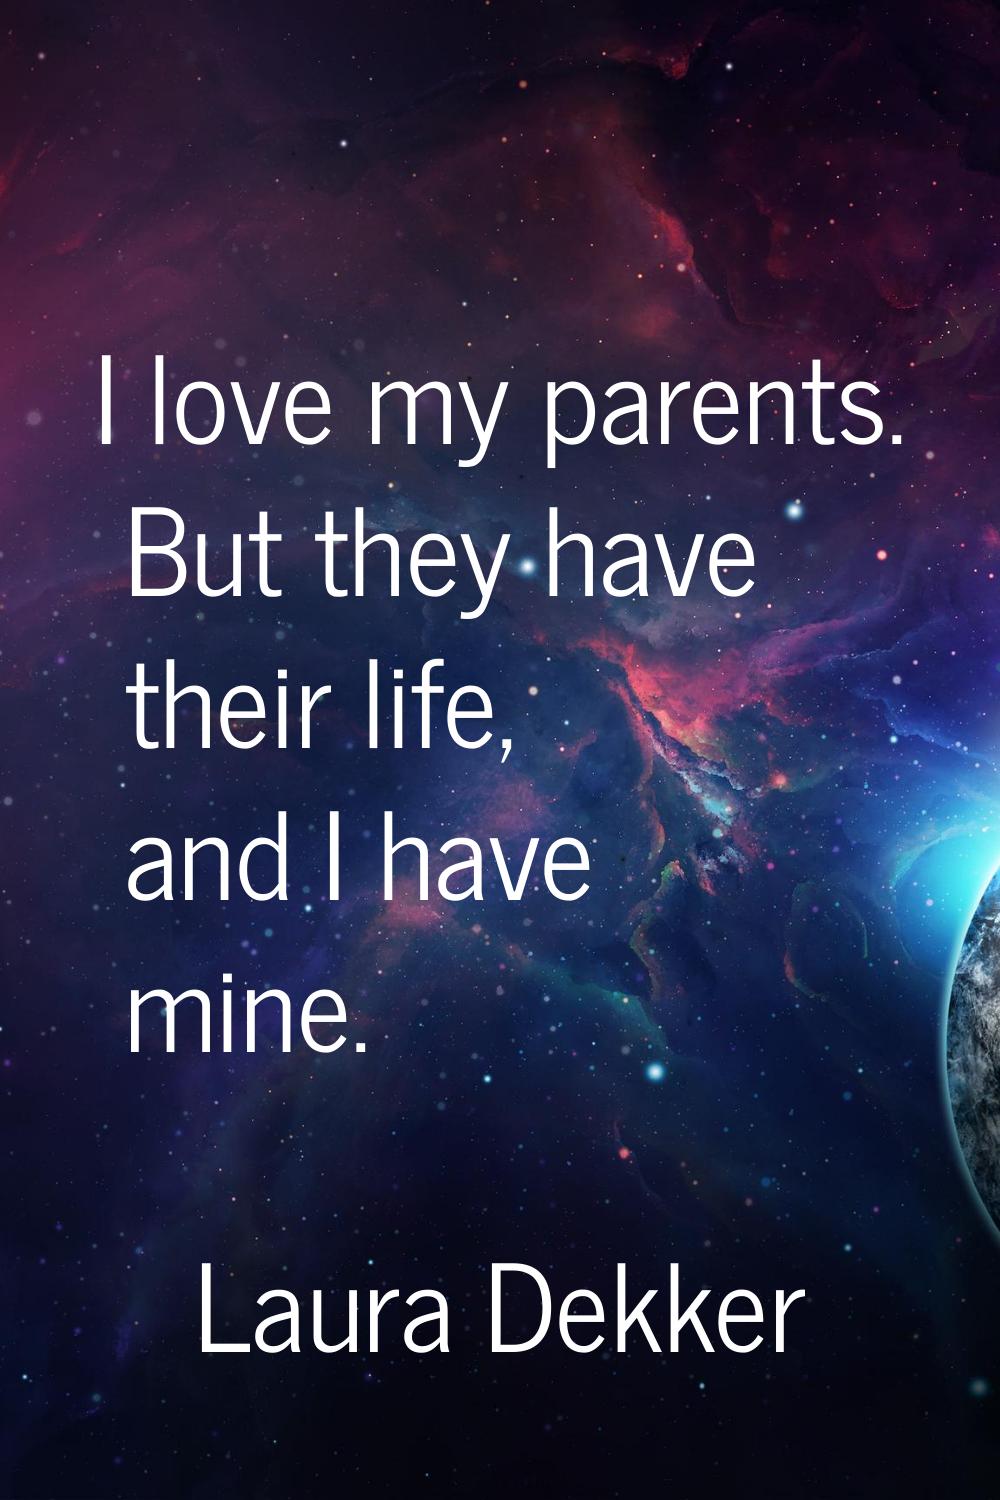 I love my parents. But they have their life, and I have mine.